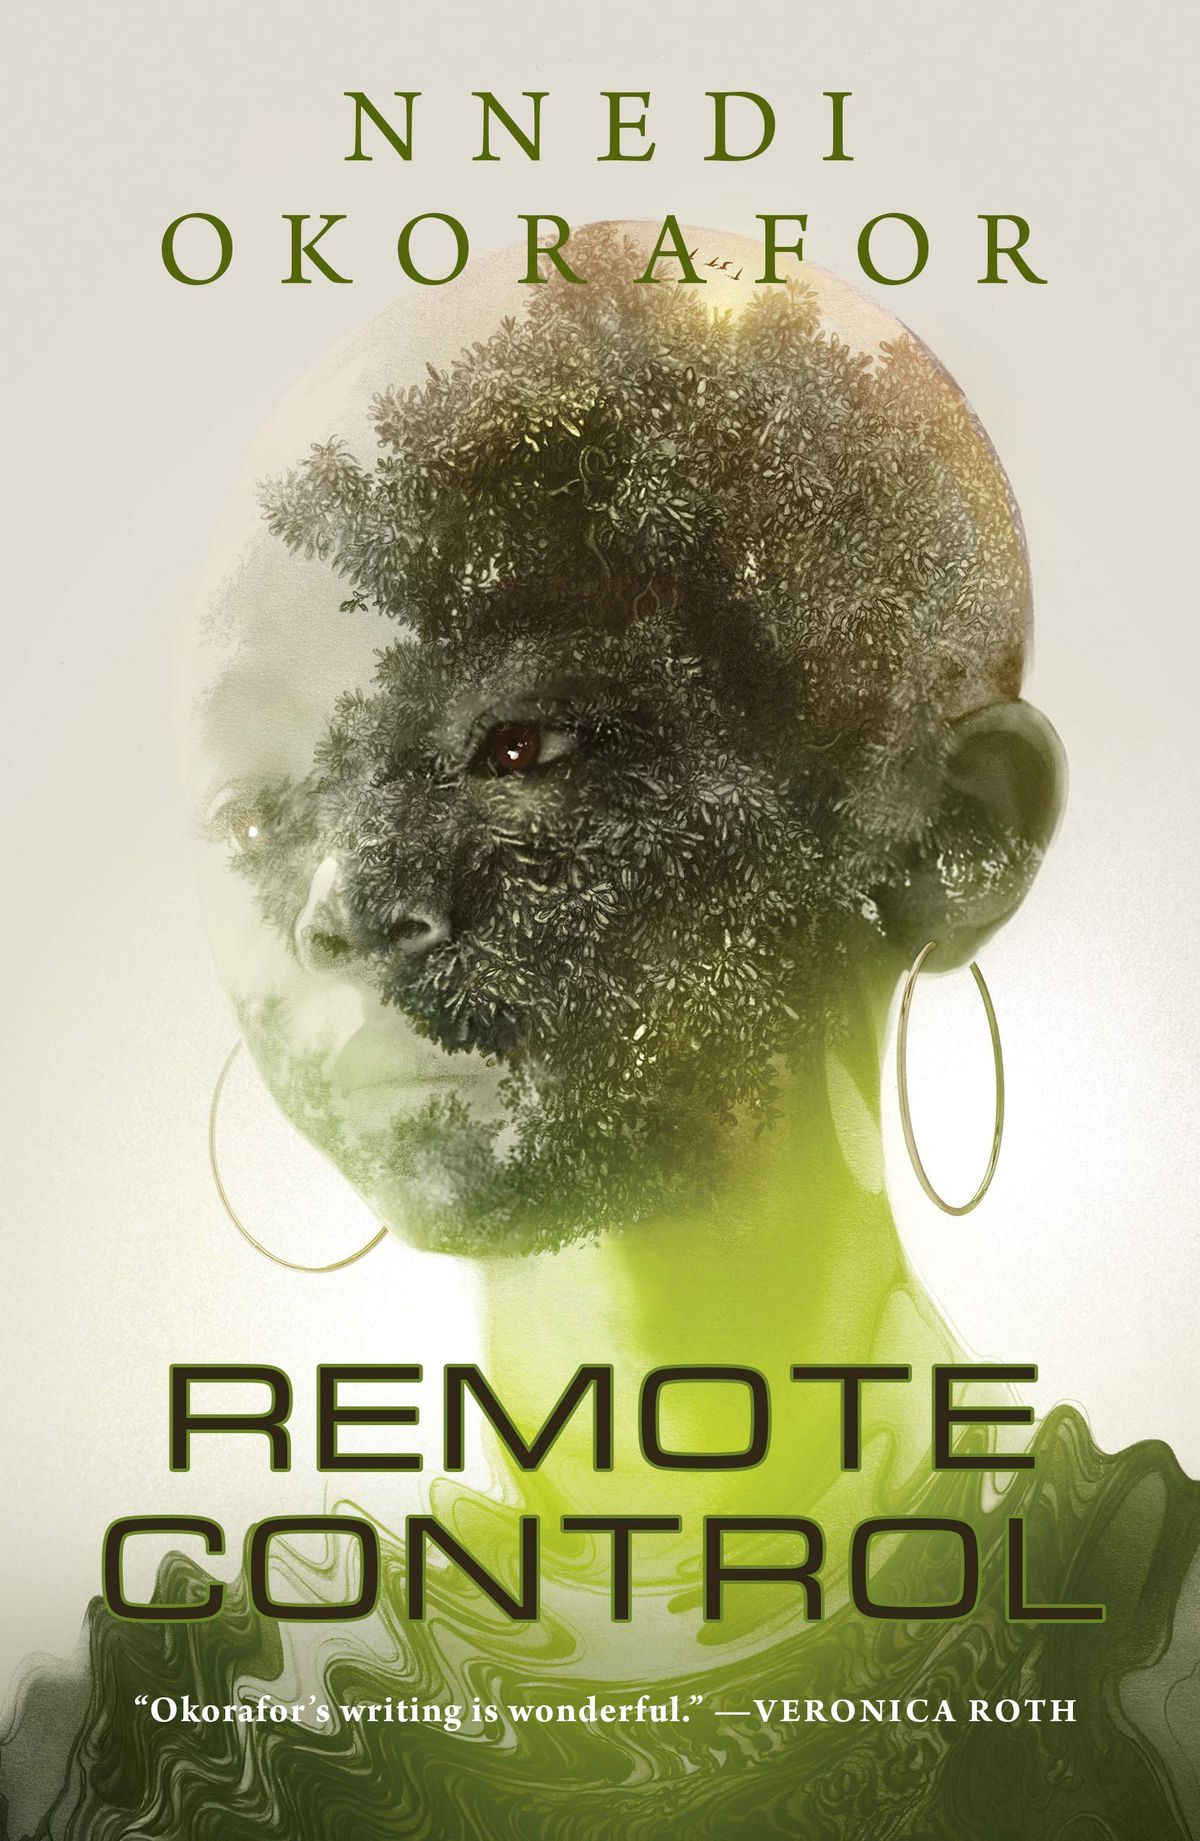 The cover for “Remote Control” by Nnedi Okorafor which shows the headshot of a Black woman, mixed with an image of a tree